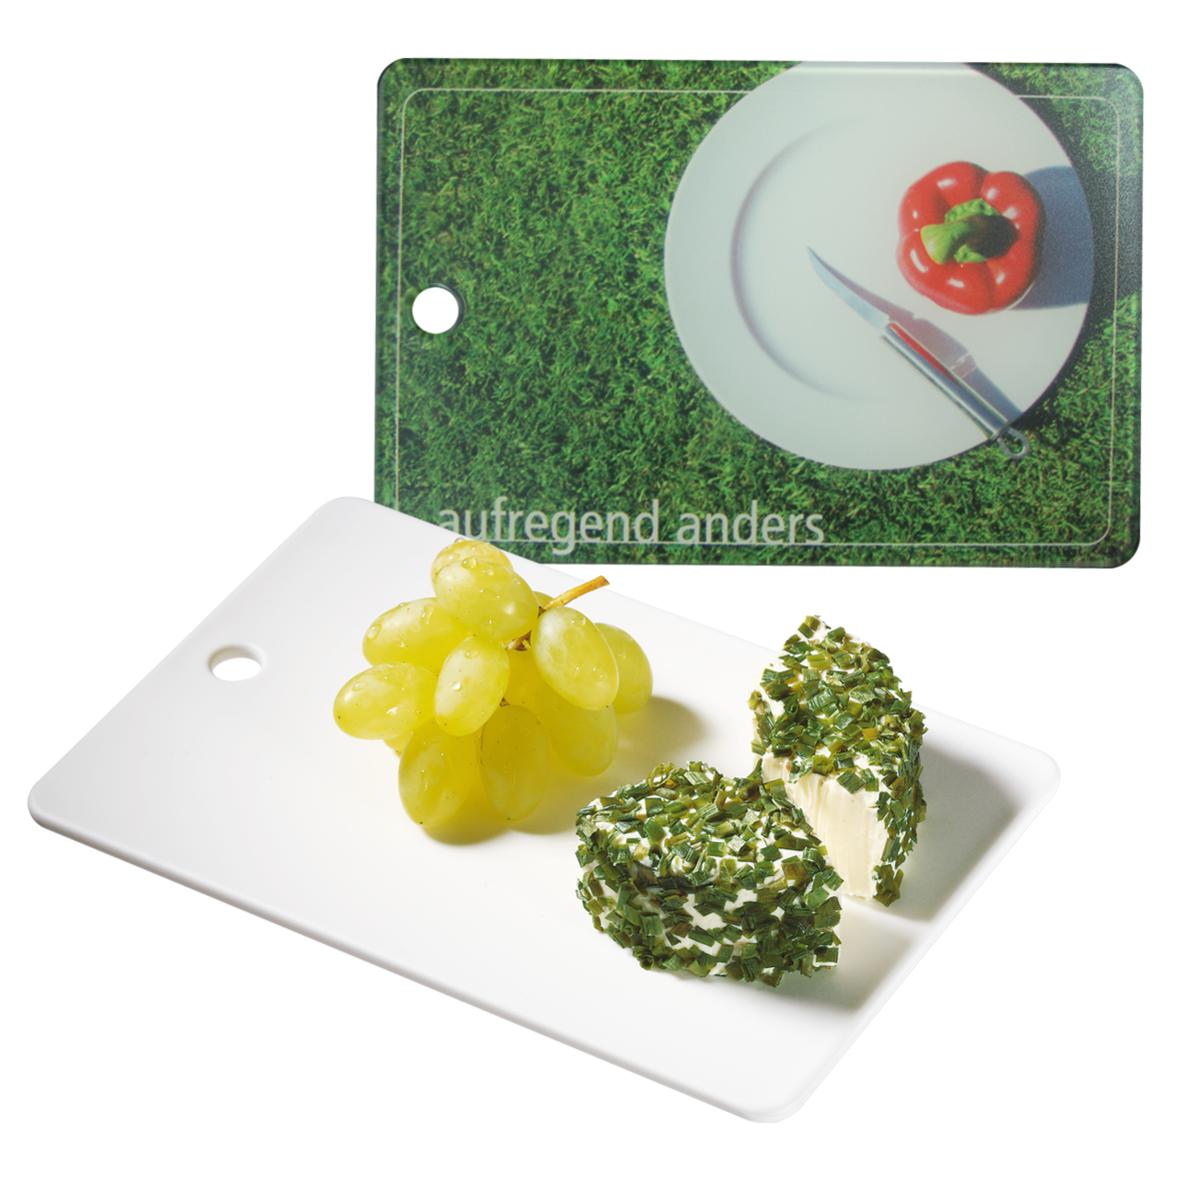 Practical Chopping Board - Shotteswell - Houghton-le-Spring